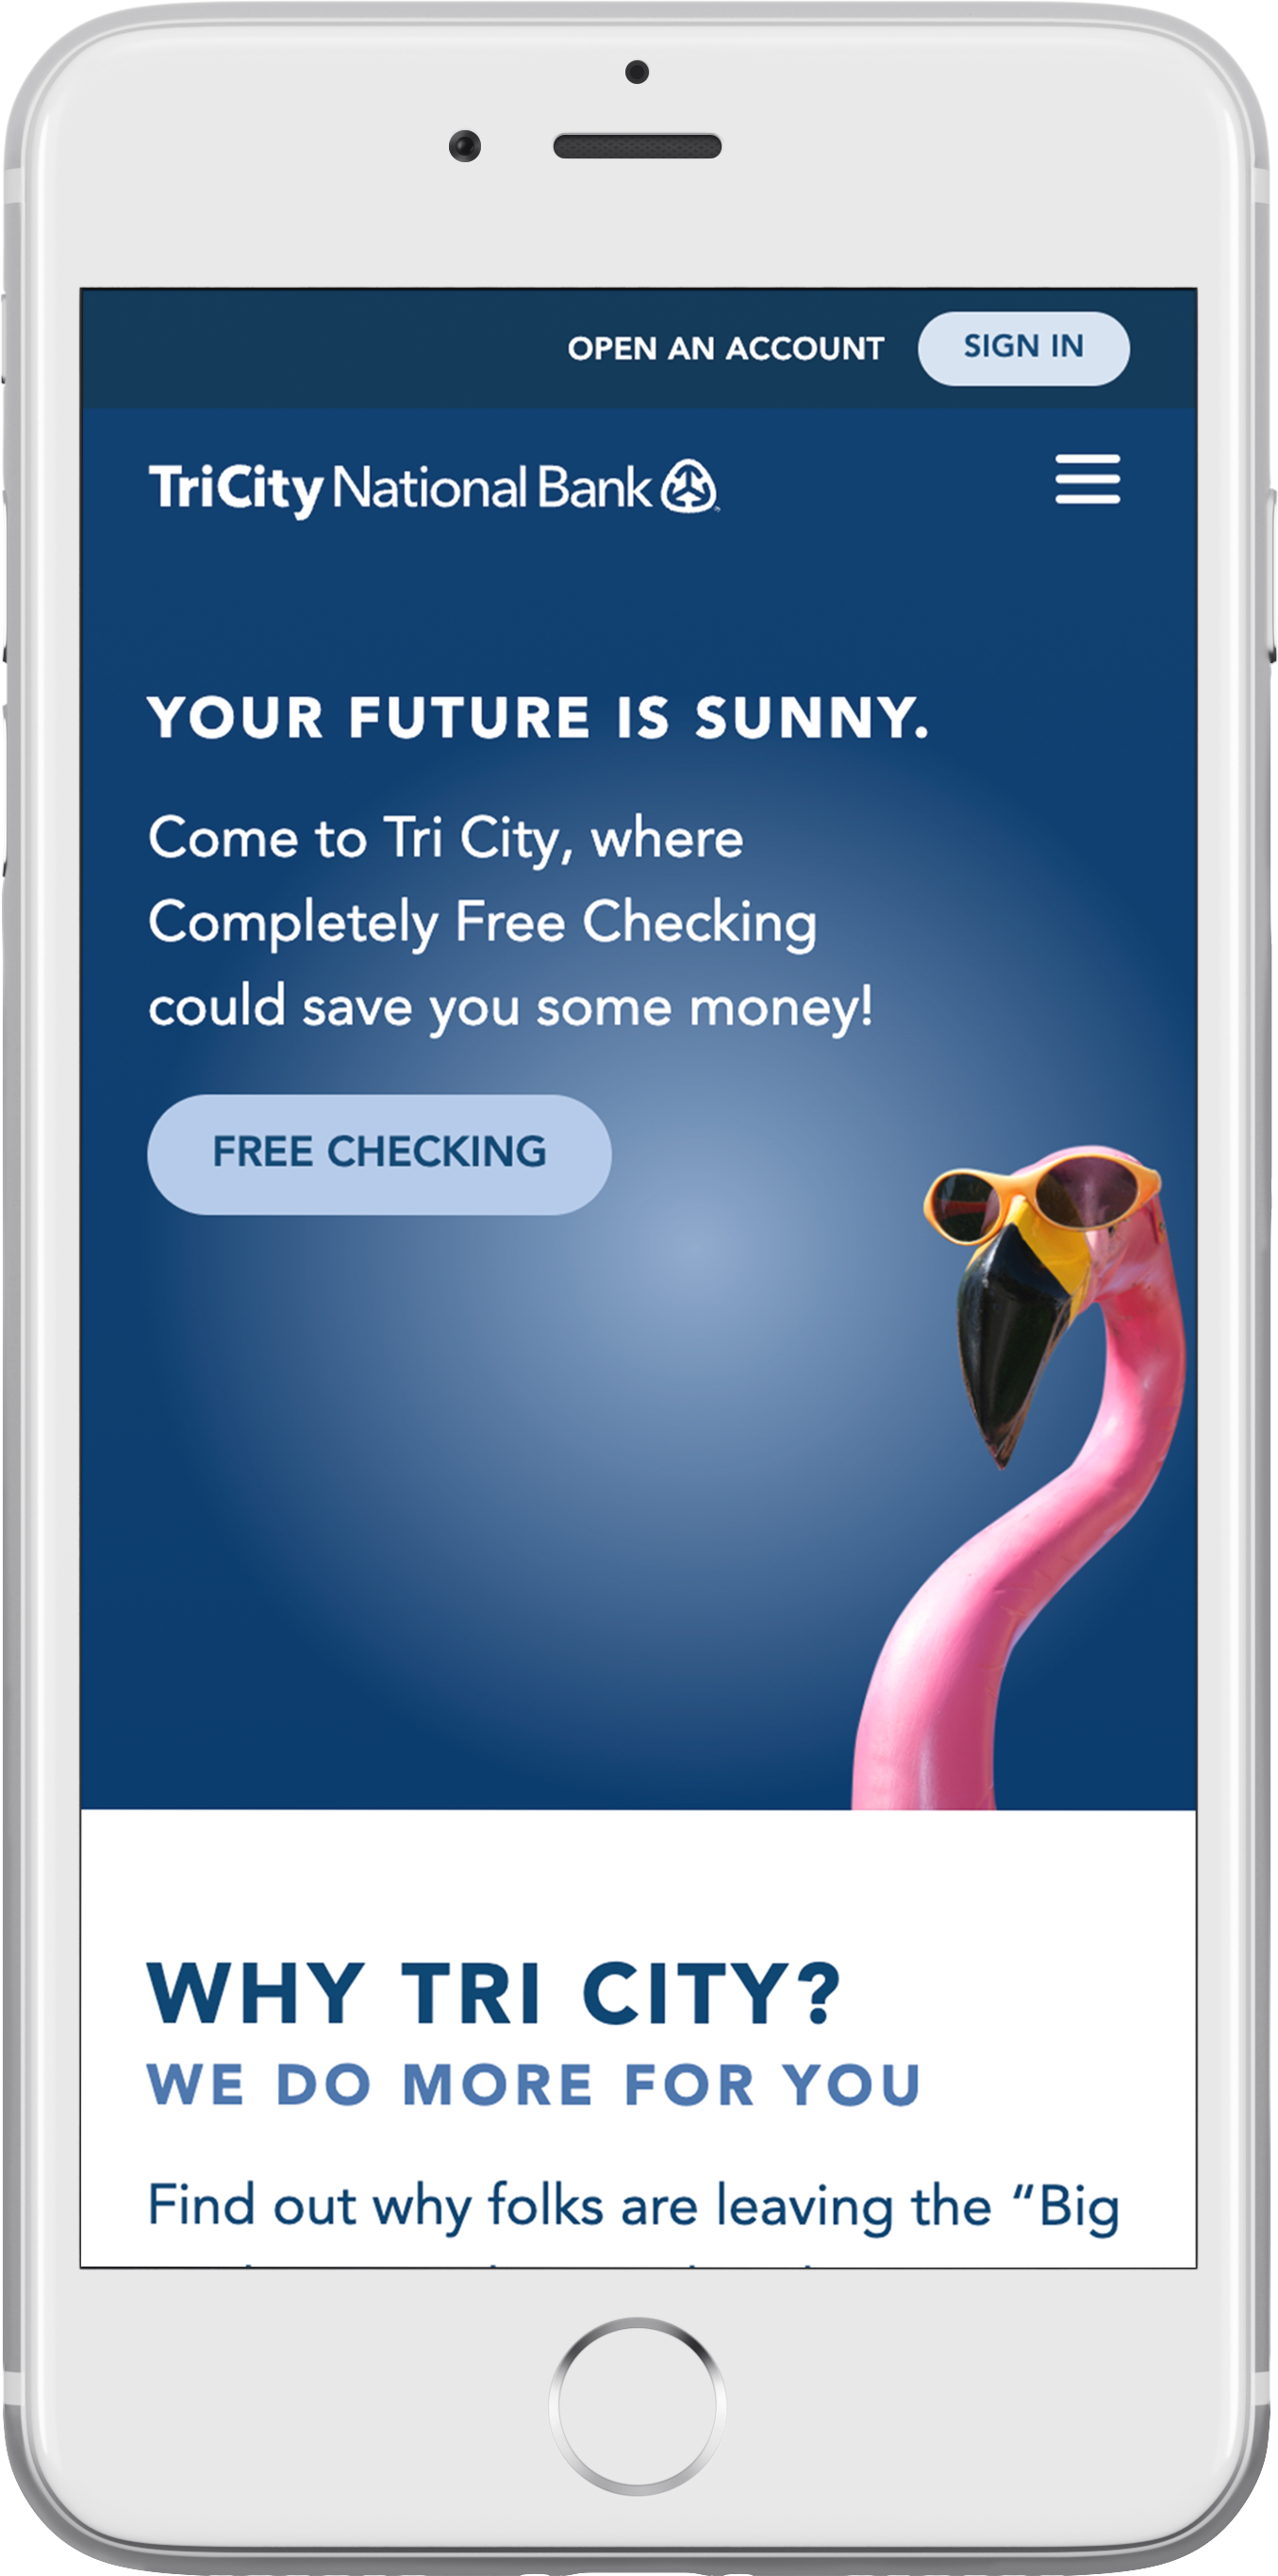 Tri City National Bank’s responsive bank website on a smartphone